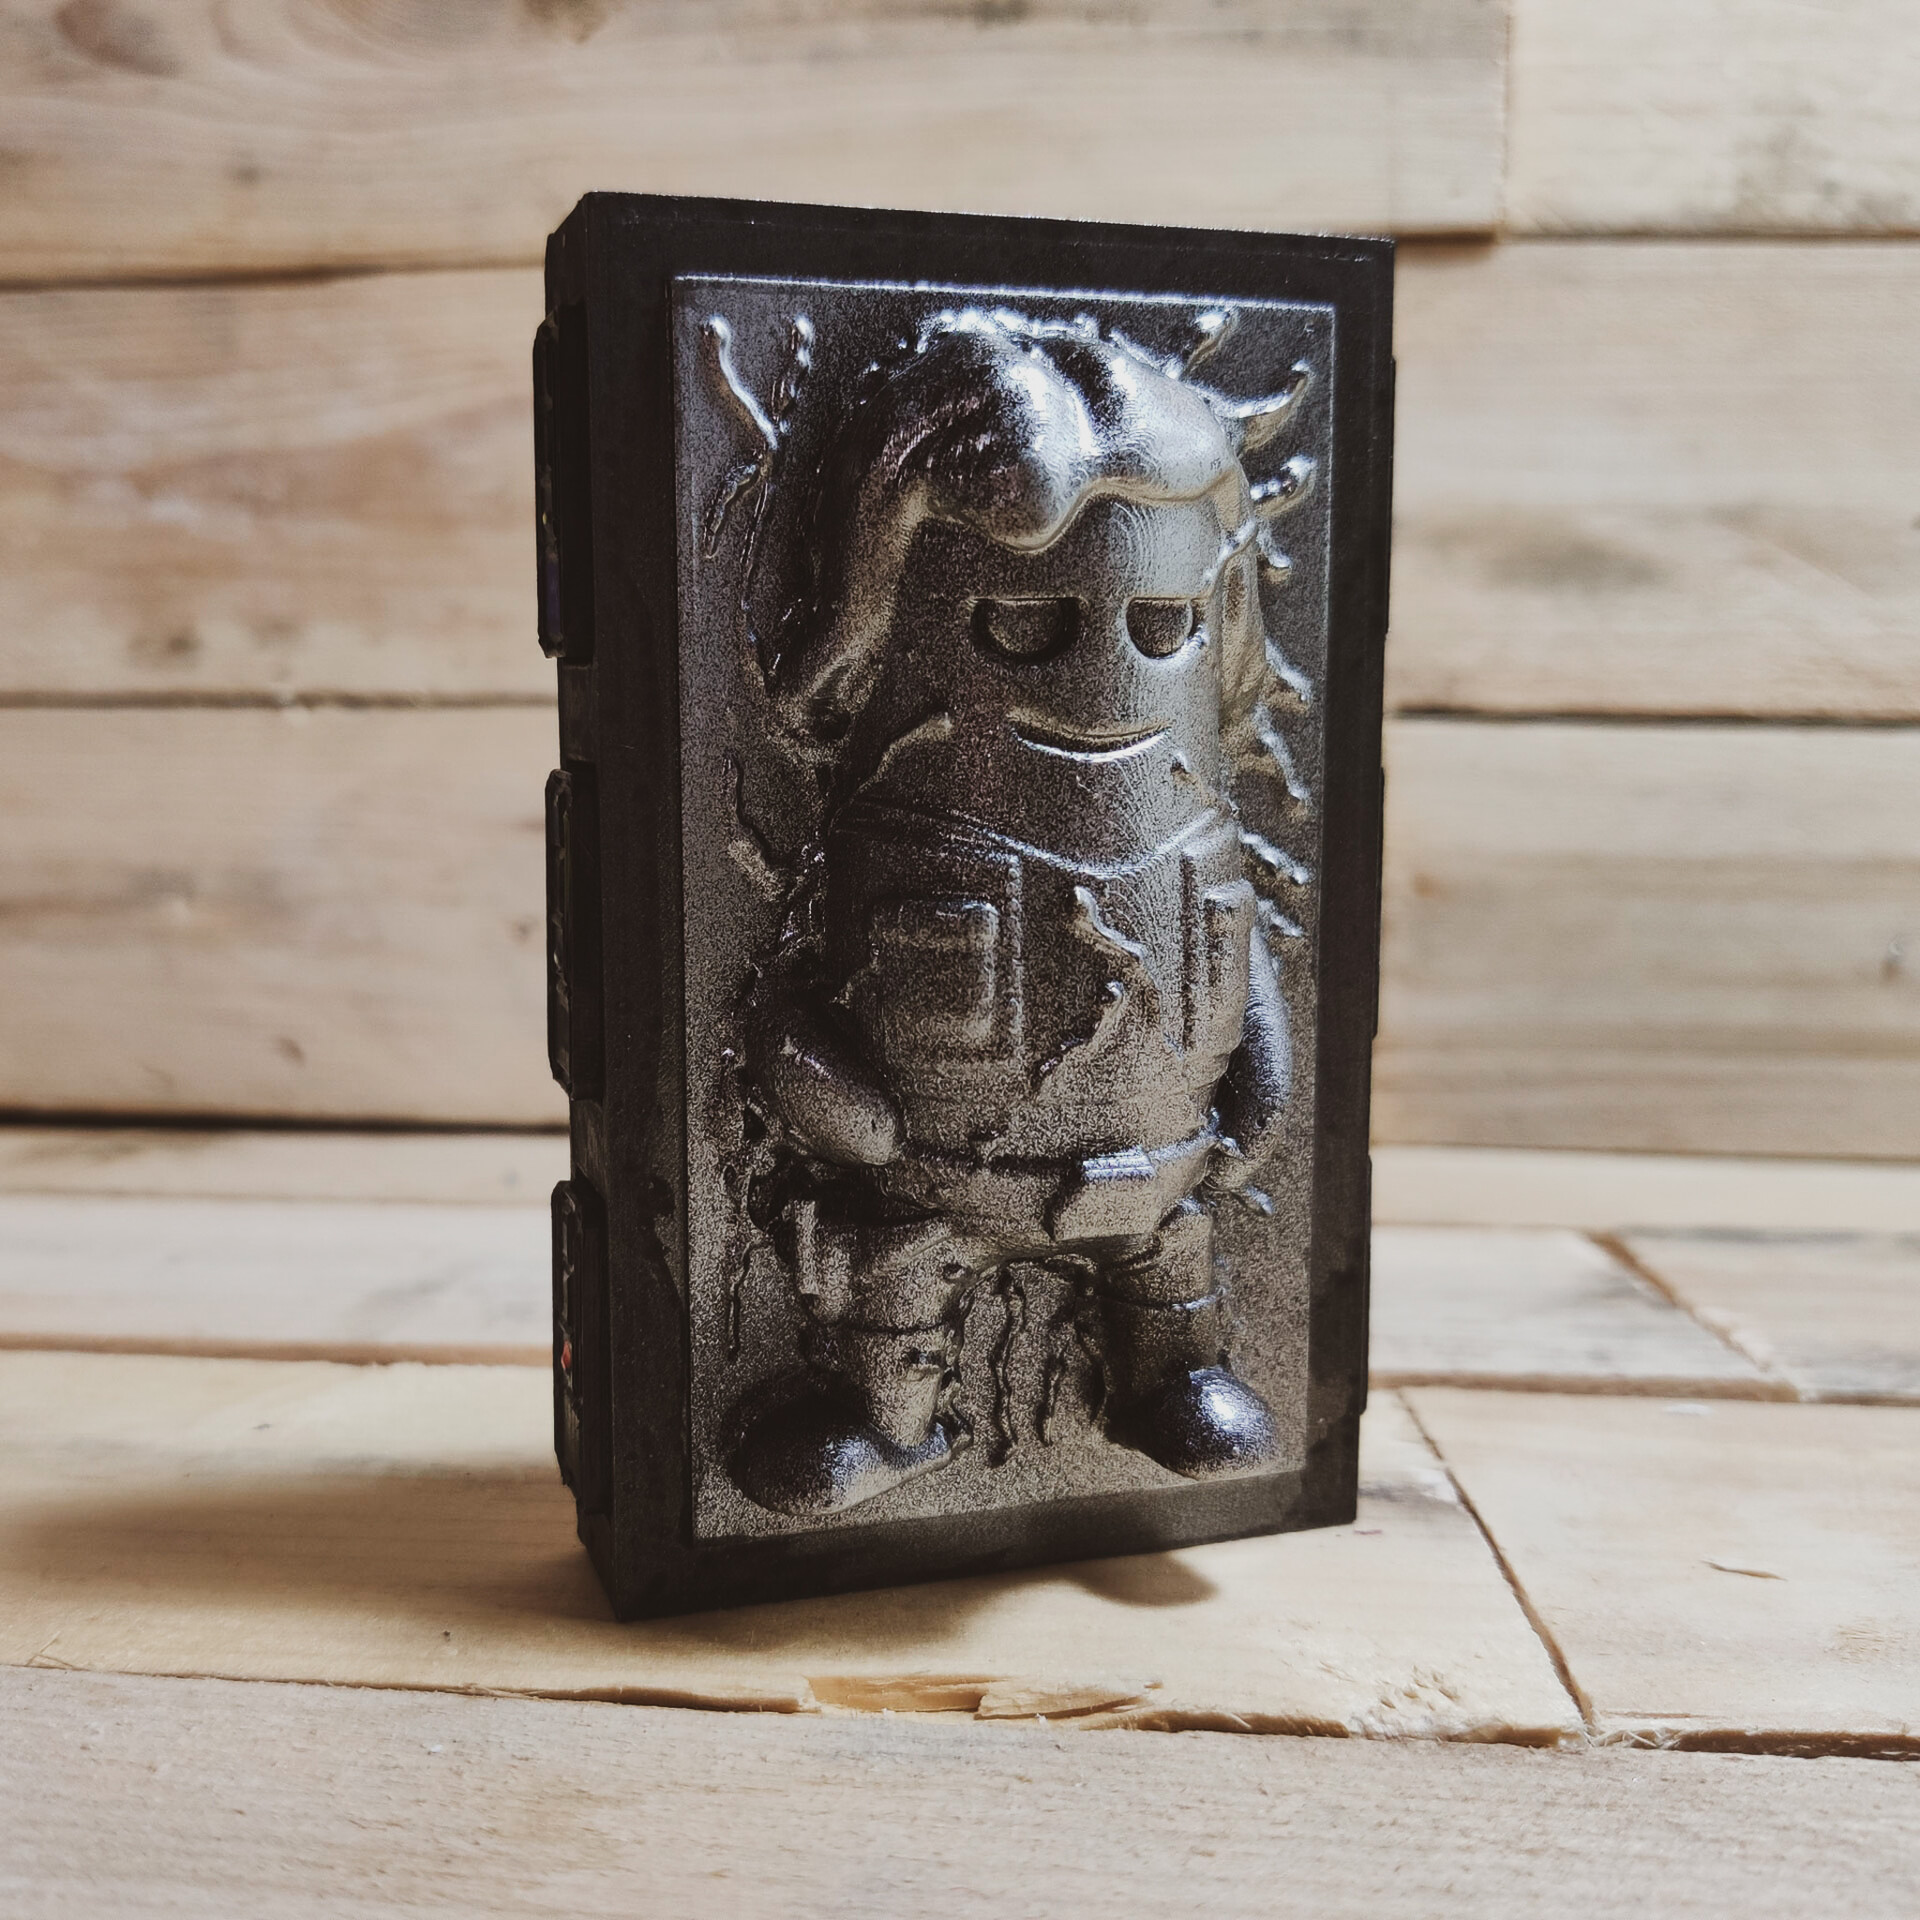 Fr3d @The3Dprinting Solo Frozen In Carbonite